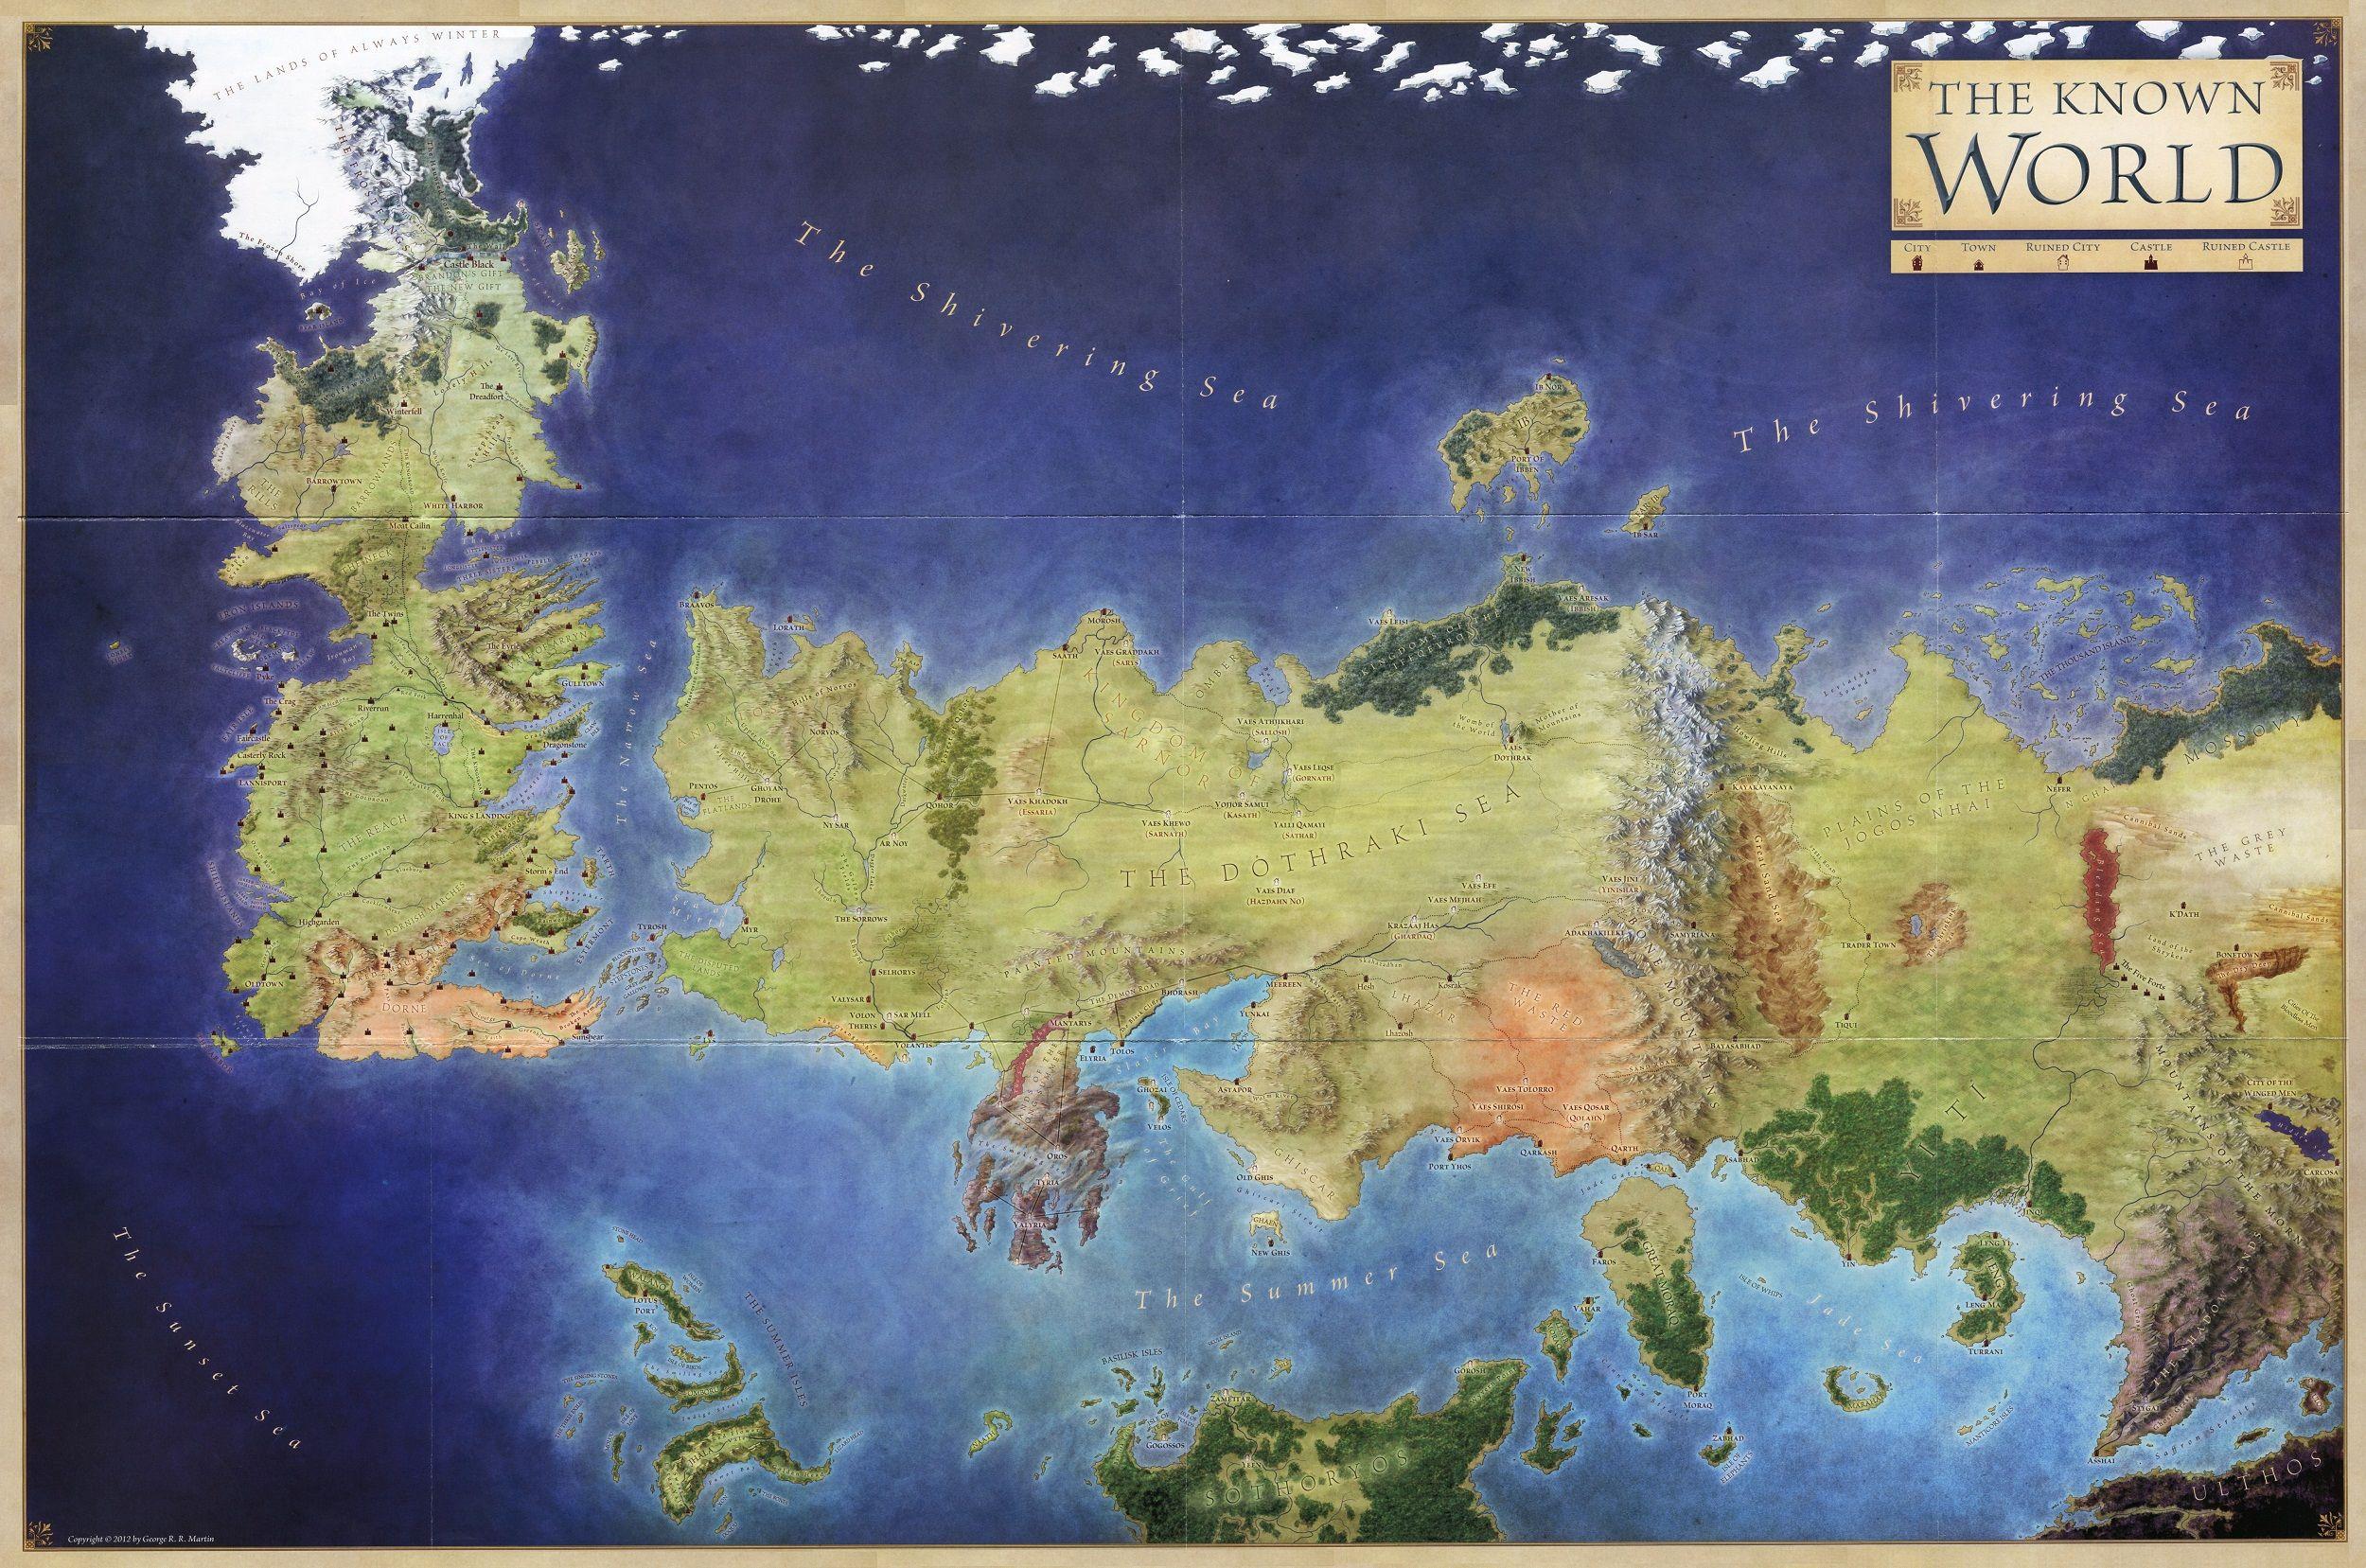 high resolution full map of game of thrones world Game Of Thrones Map Wallpapers Top Free Game Of Thrones Map high resolution full map of game of thrones world